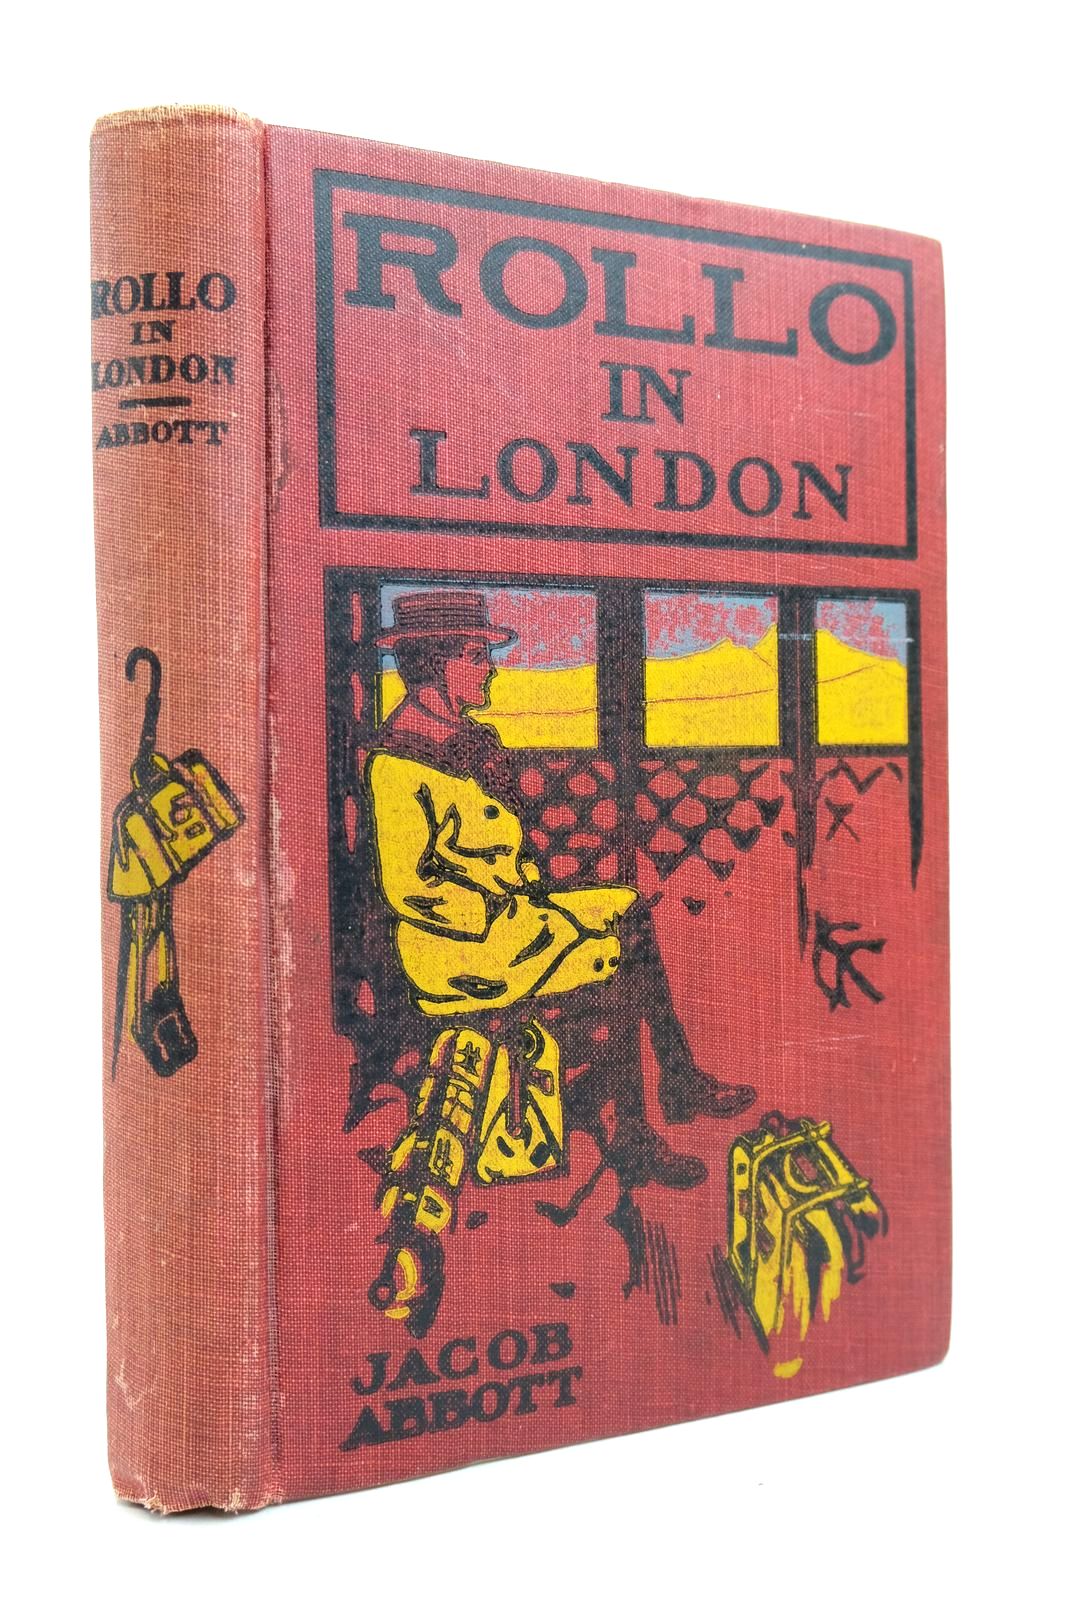 Photo of ROLLO IN LONDON- Stock Number: 2134795